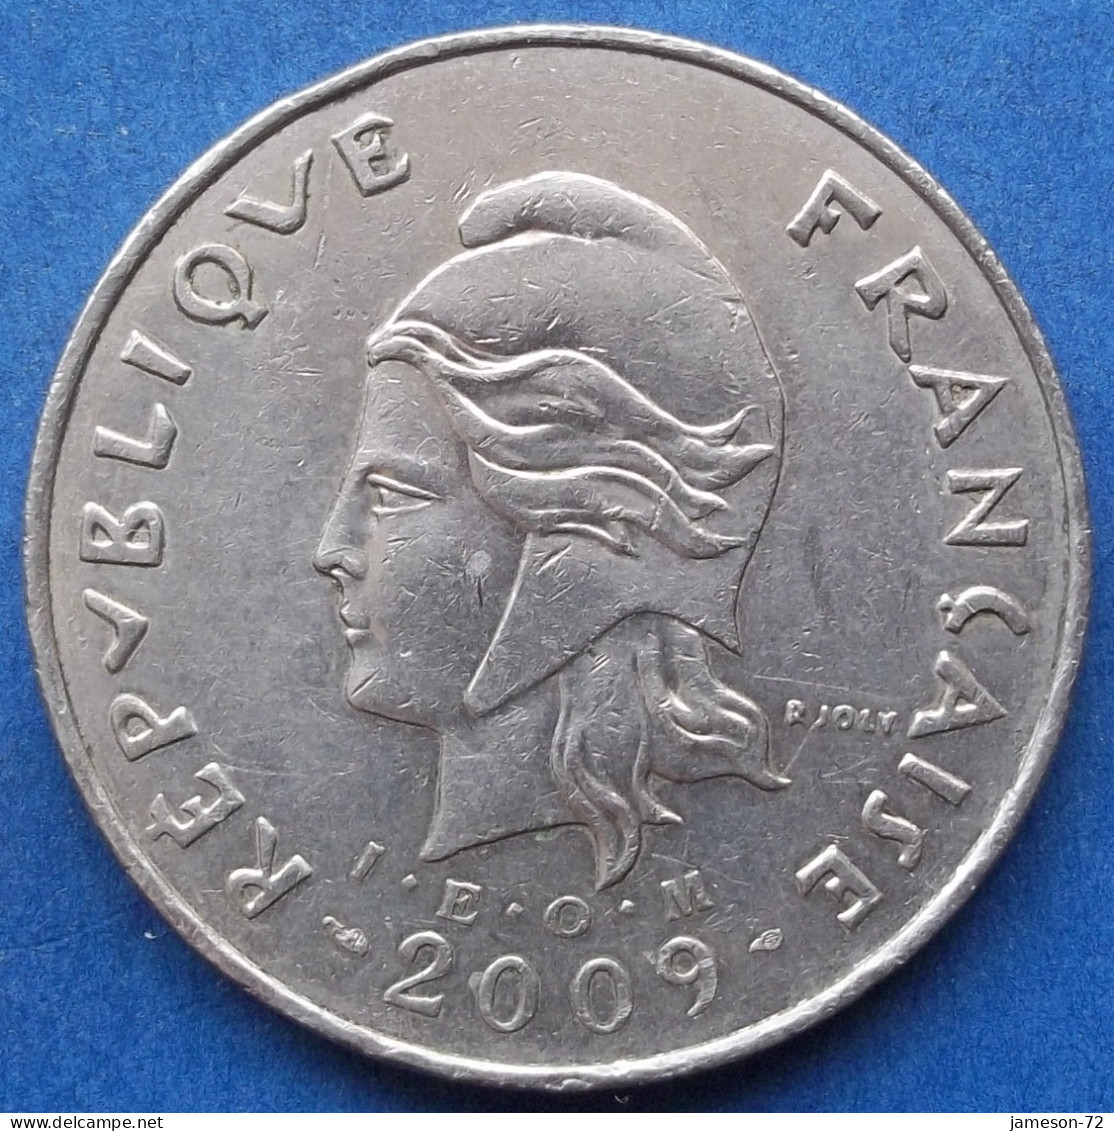 NEW CALEDONIA - 50 Francs 2009 "Hut" KM# 13 French Associated State (1998) - Edelweiss Coins - Nouvelle-Calédonie